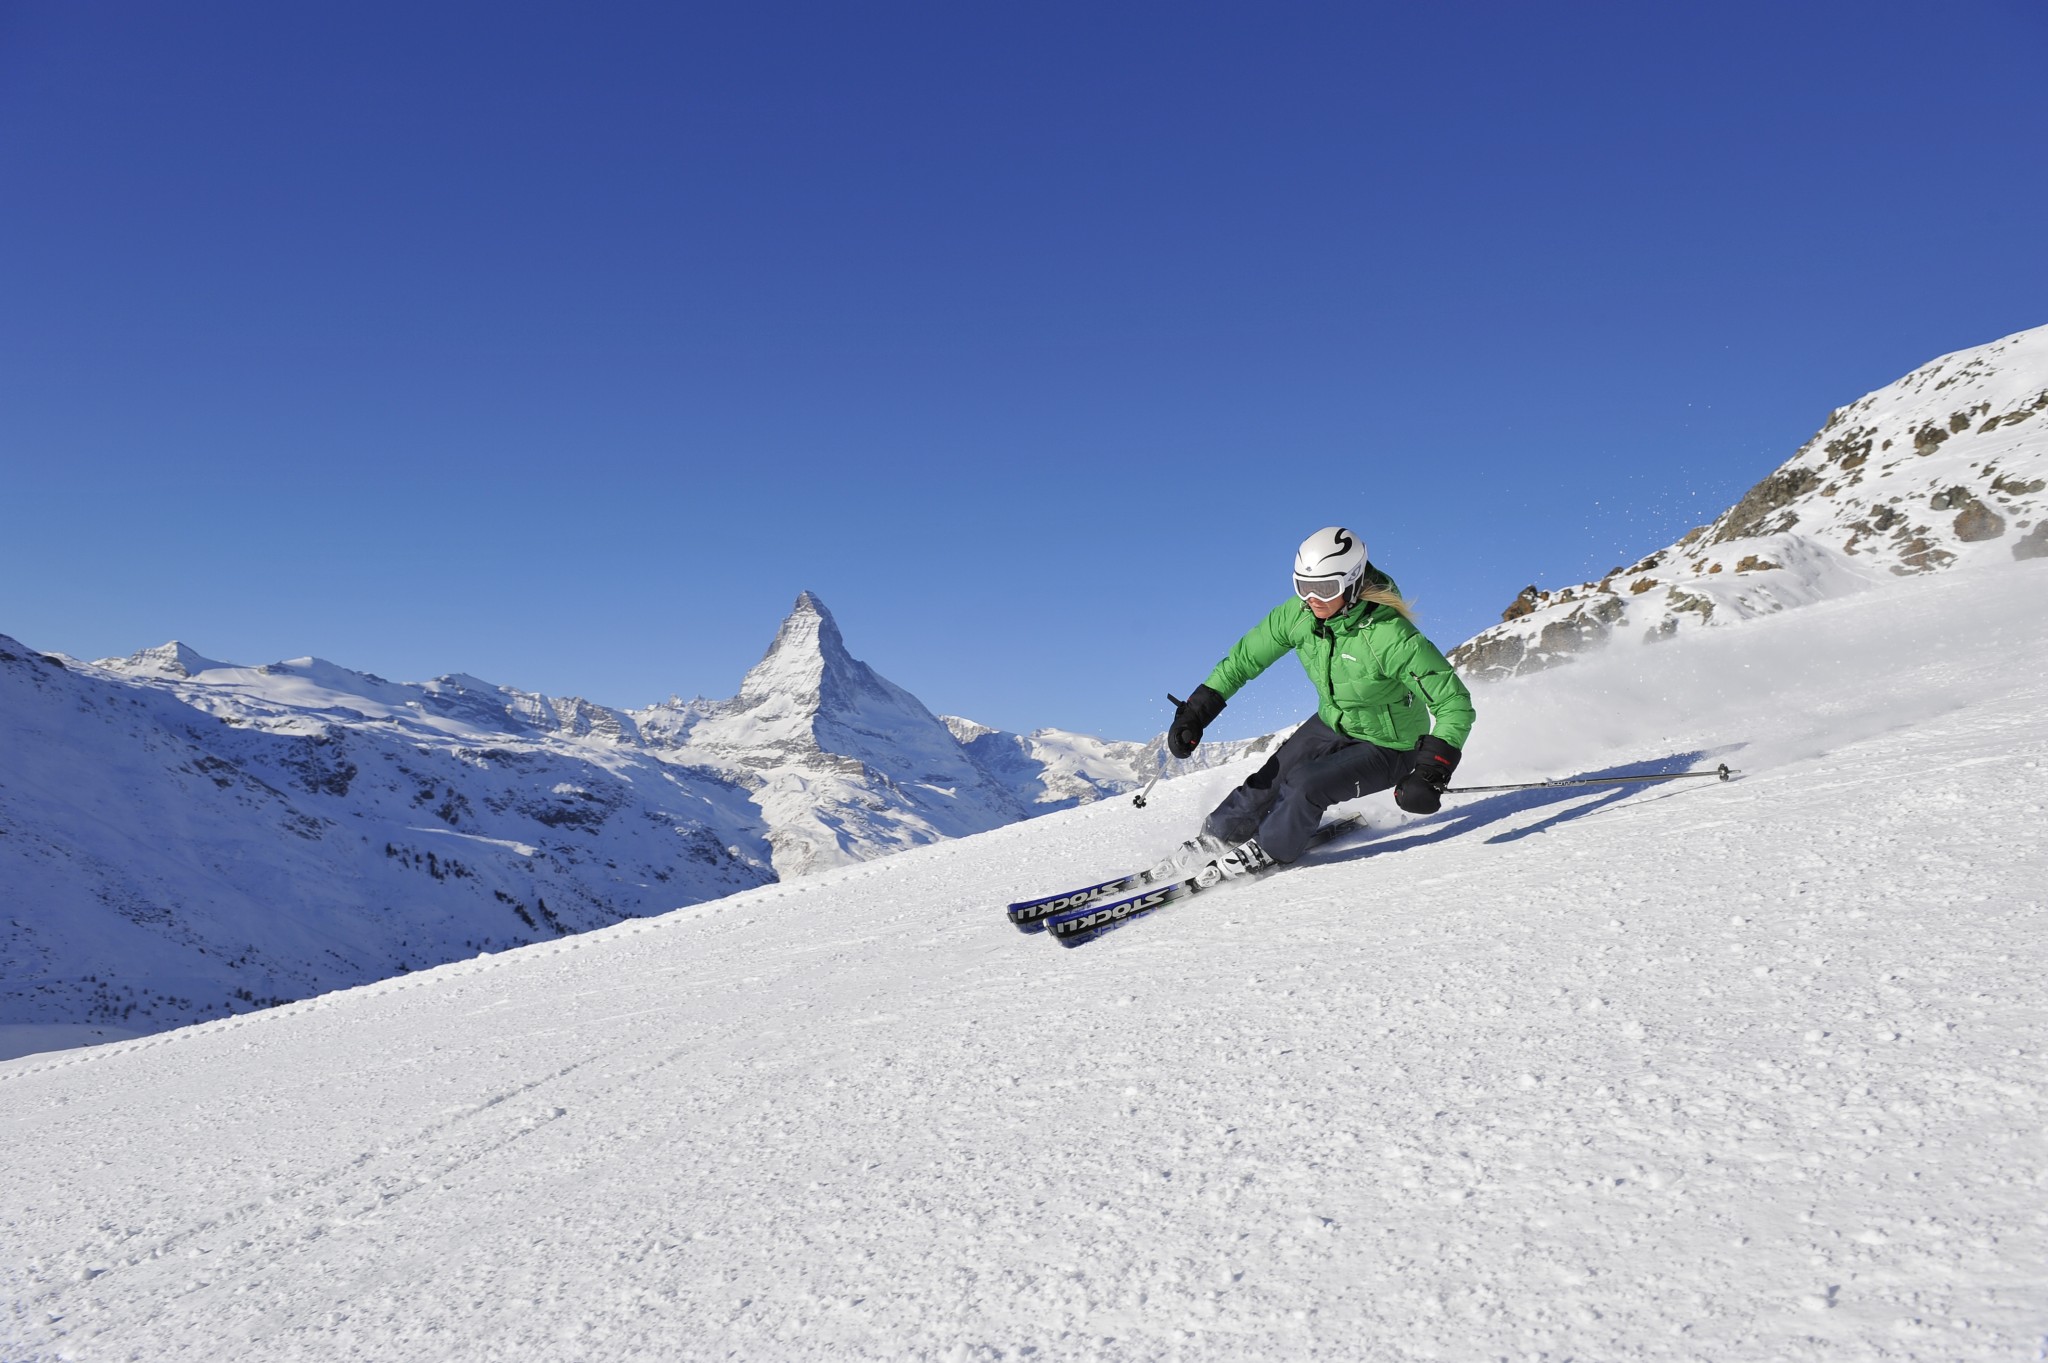 [TRAVELS] 10 Great Resort Choices For Spring Skiing